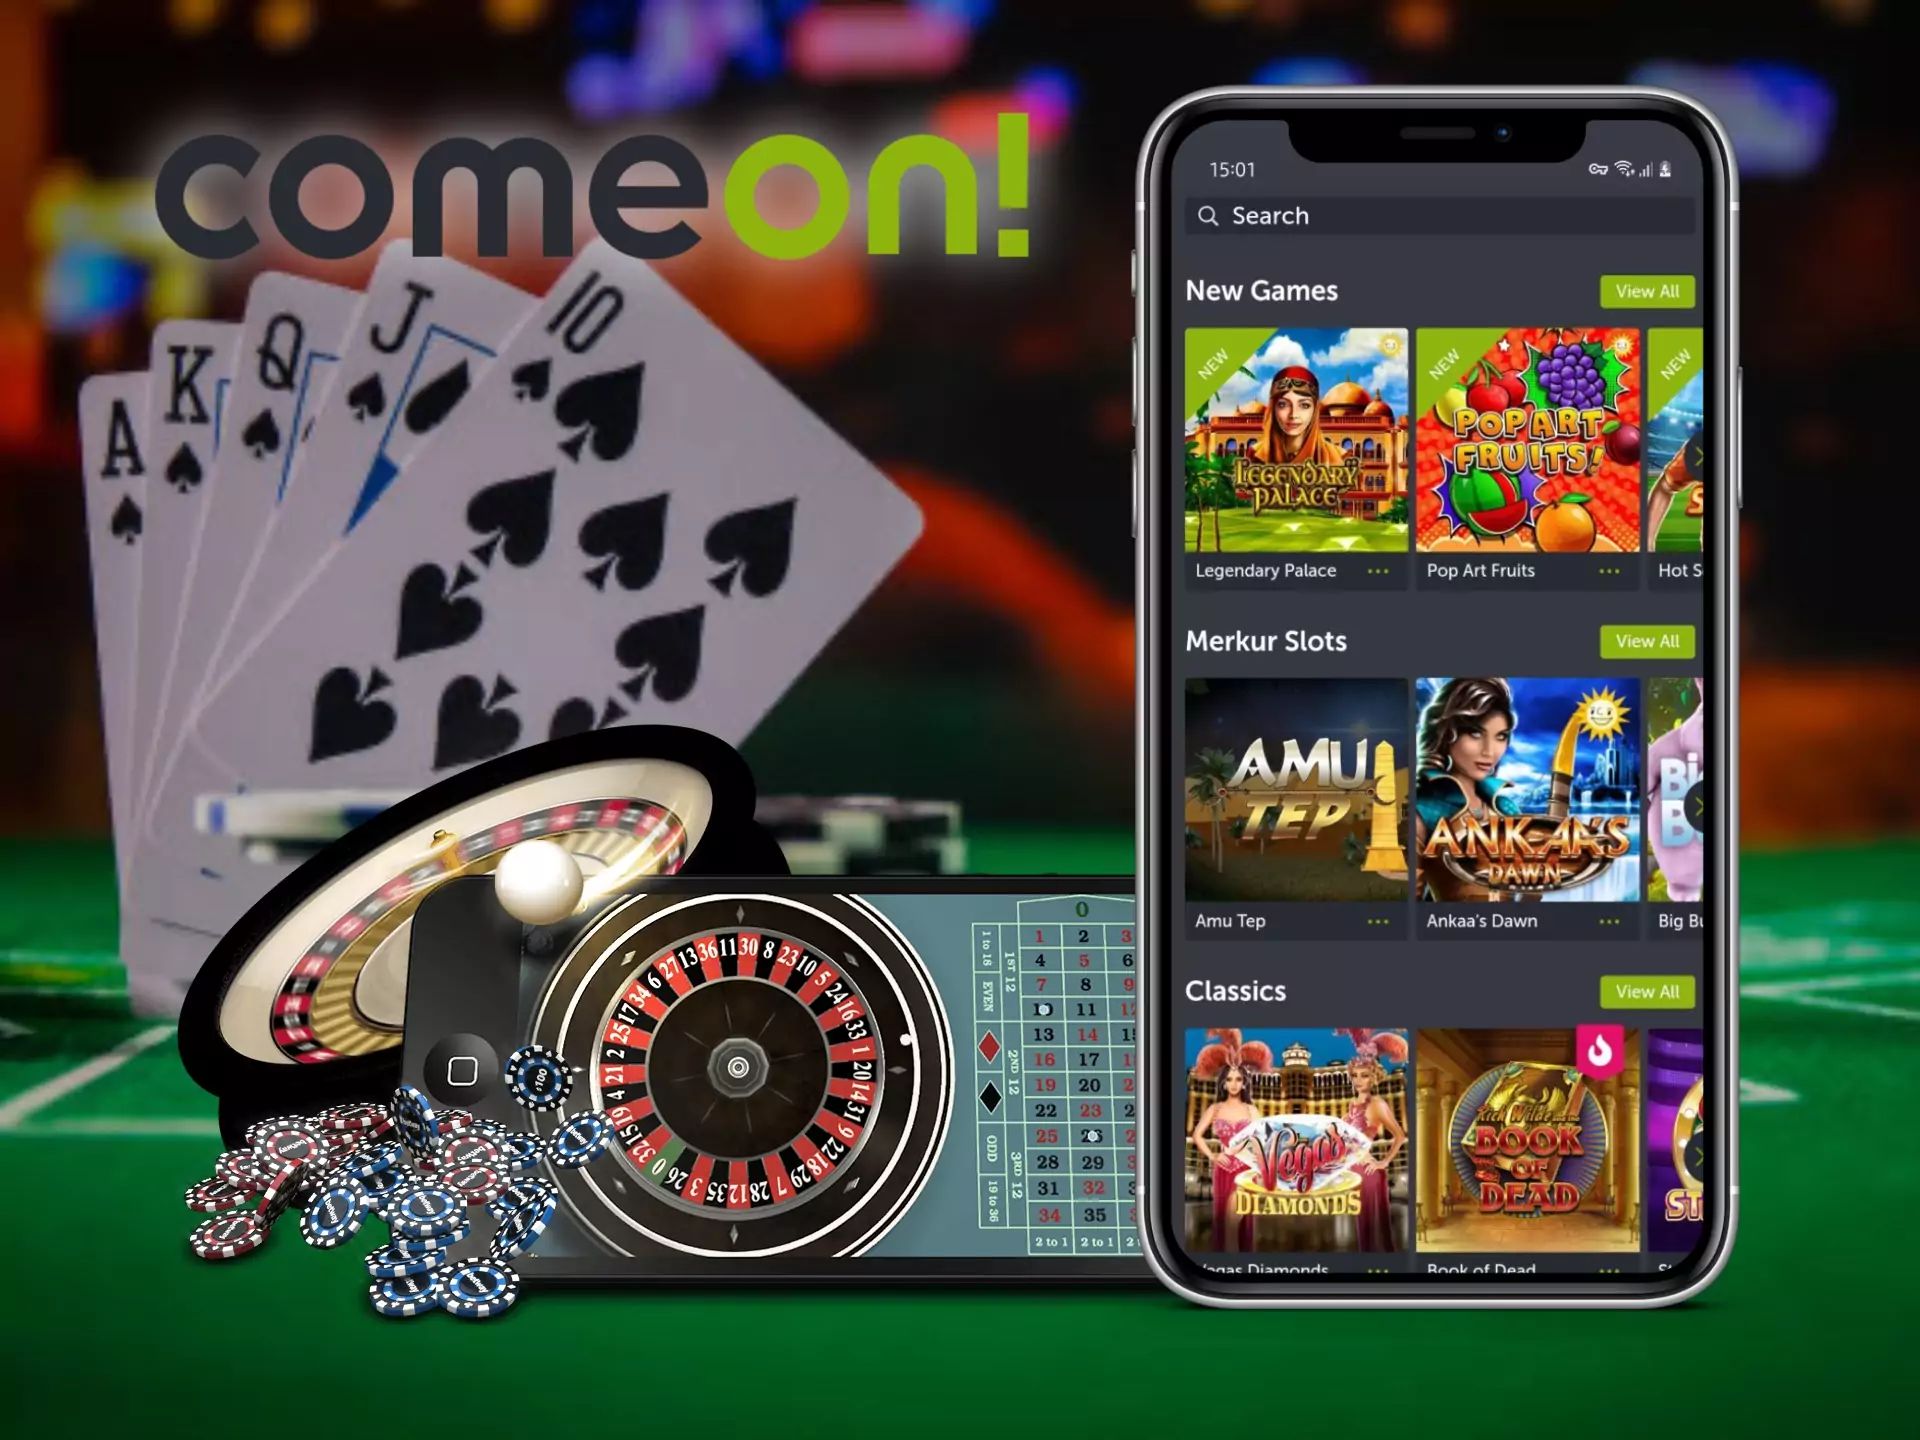 If you&#039;re tired of betting, you can play casino games at ComeOn too.